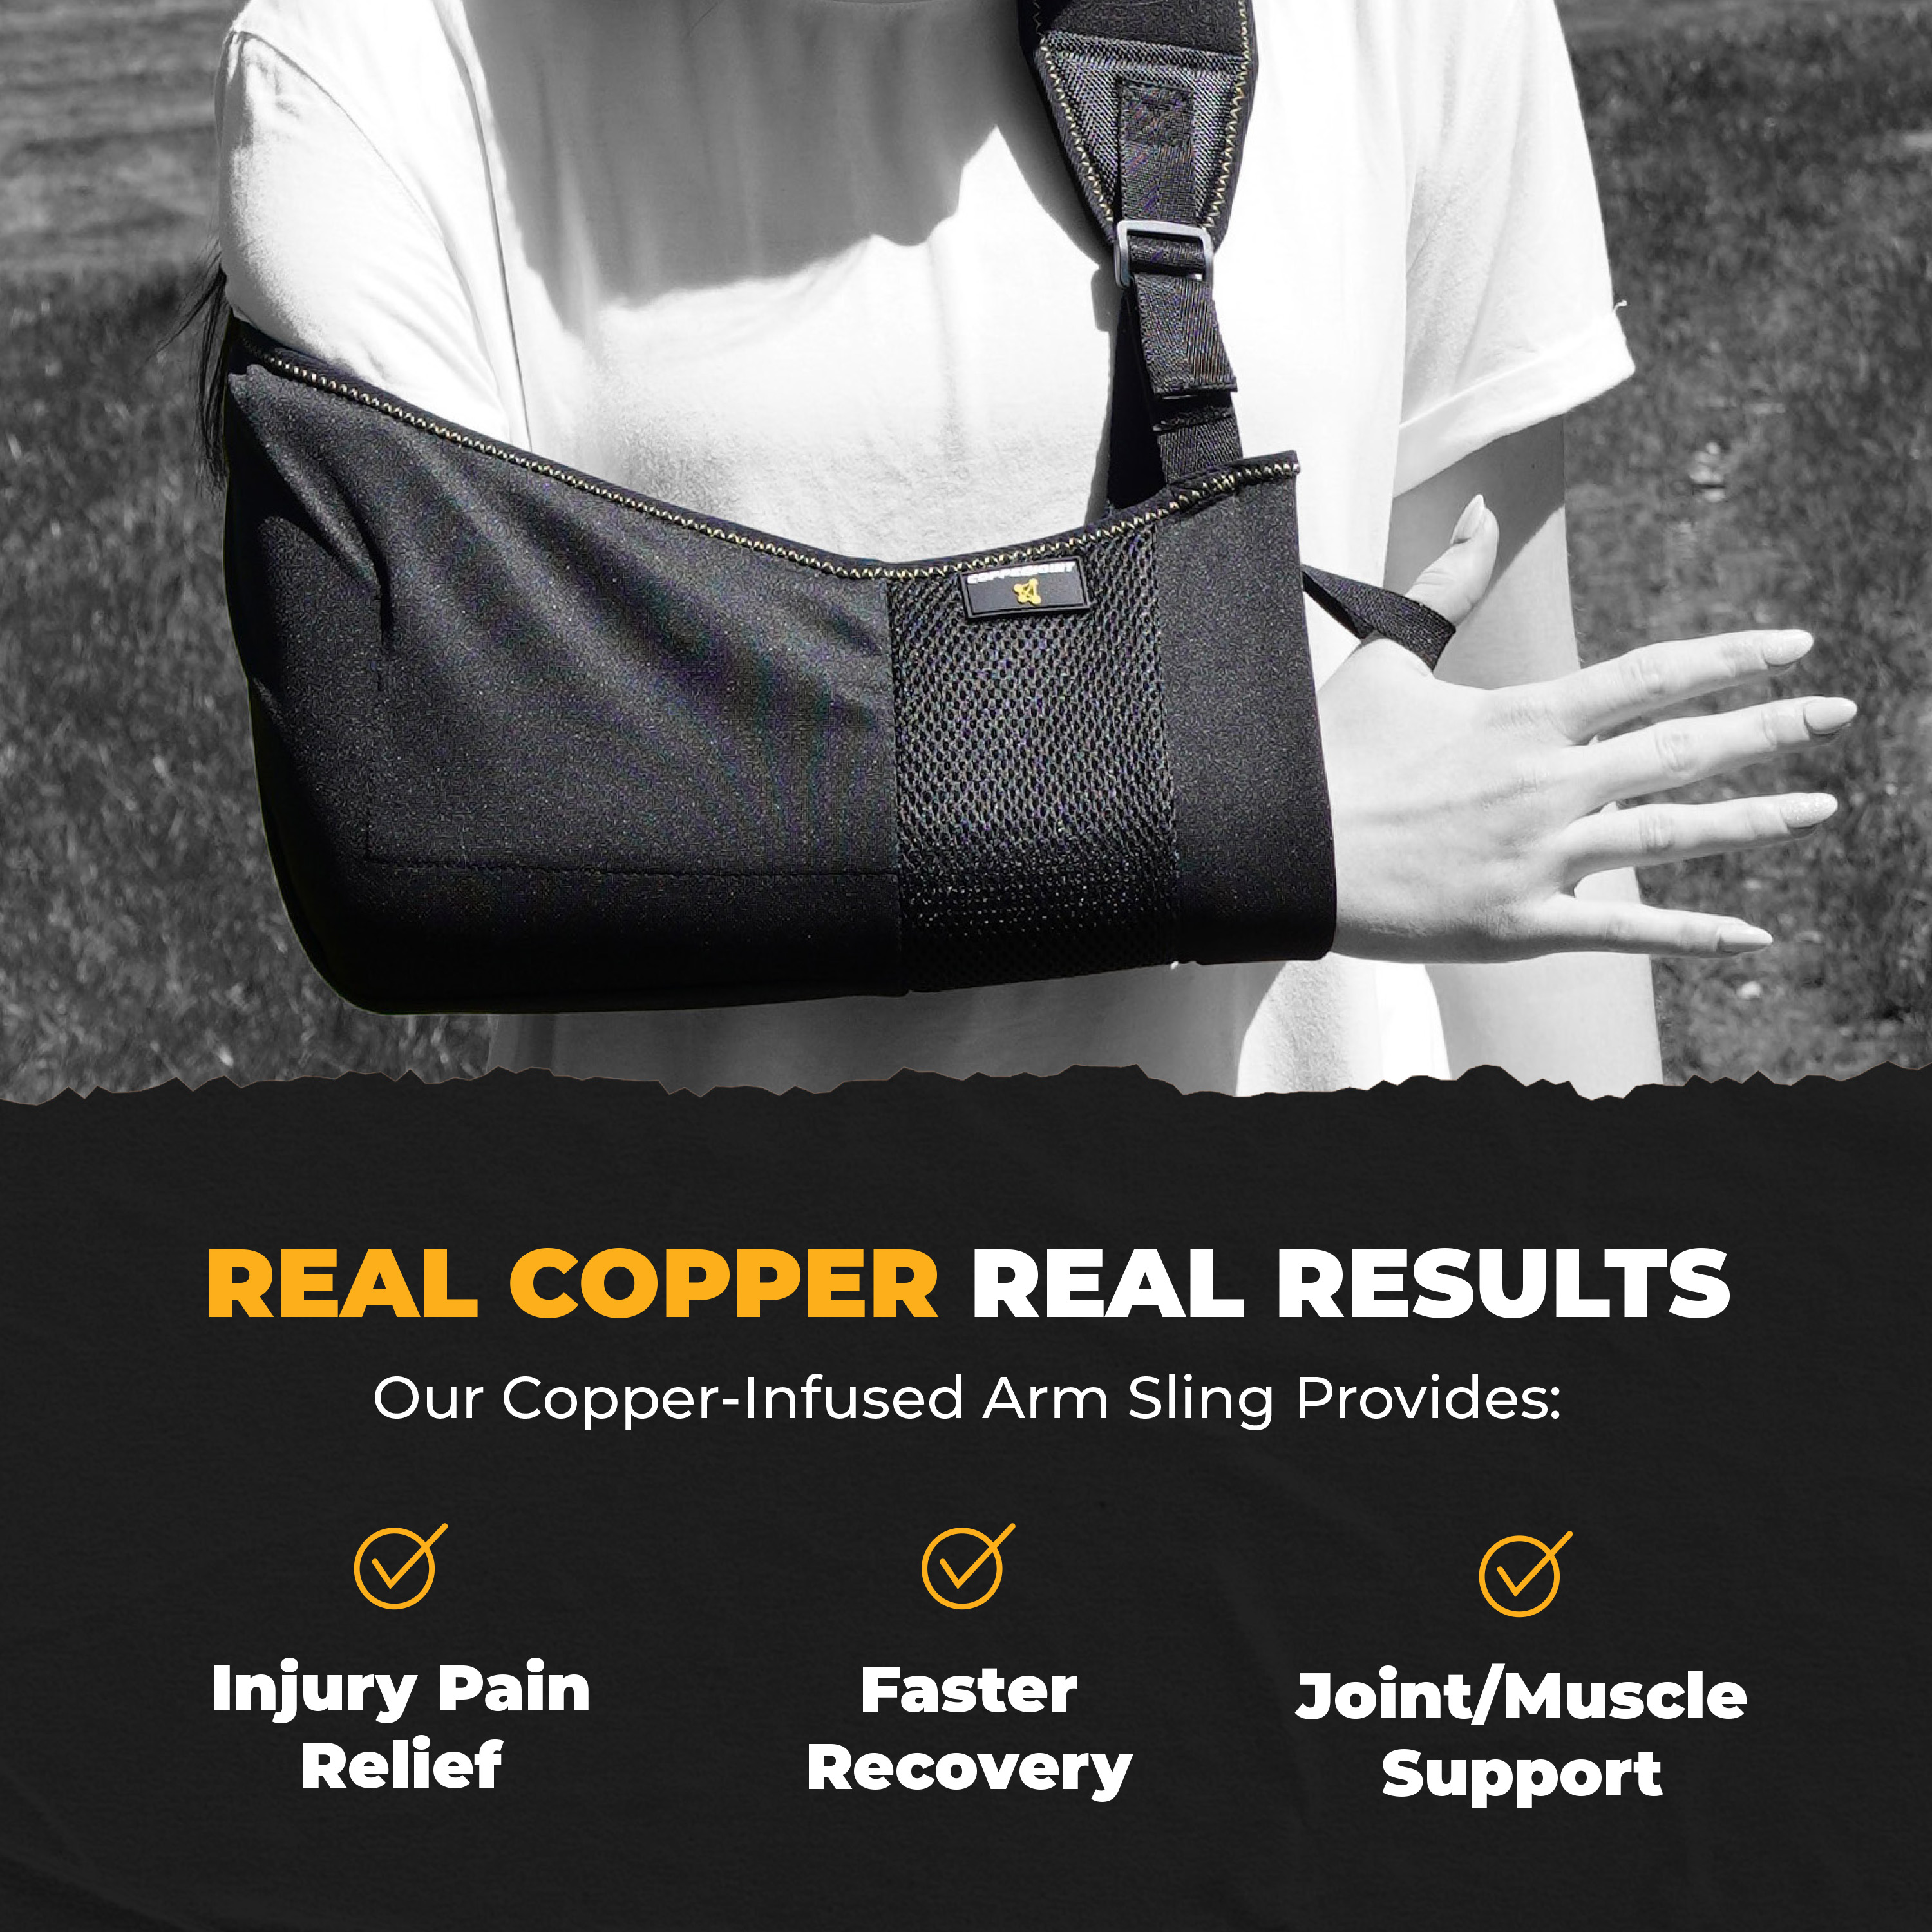 CopperJoint Launches New Sling on Amazon